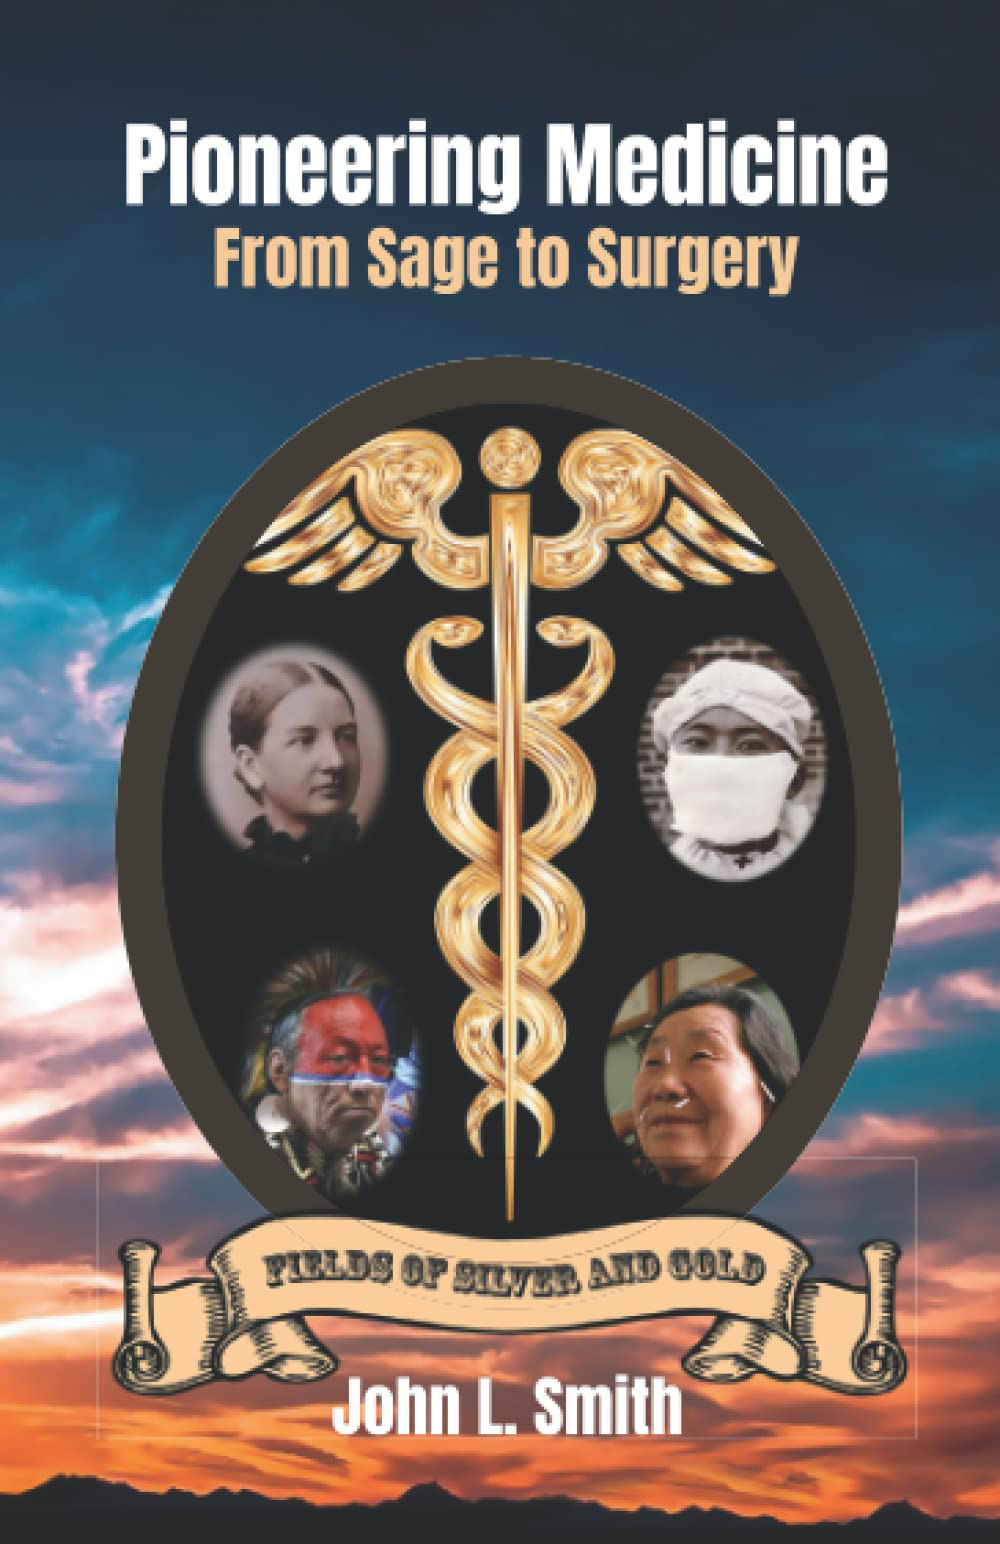 Pioneering Medicine: From Sage to Surgery (Fields of Silver and Gold)